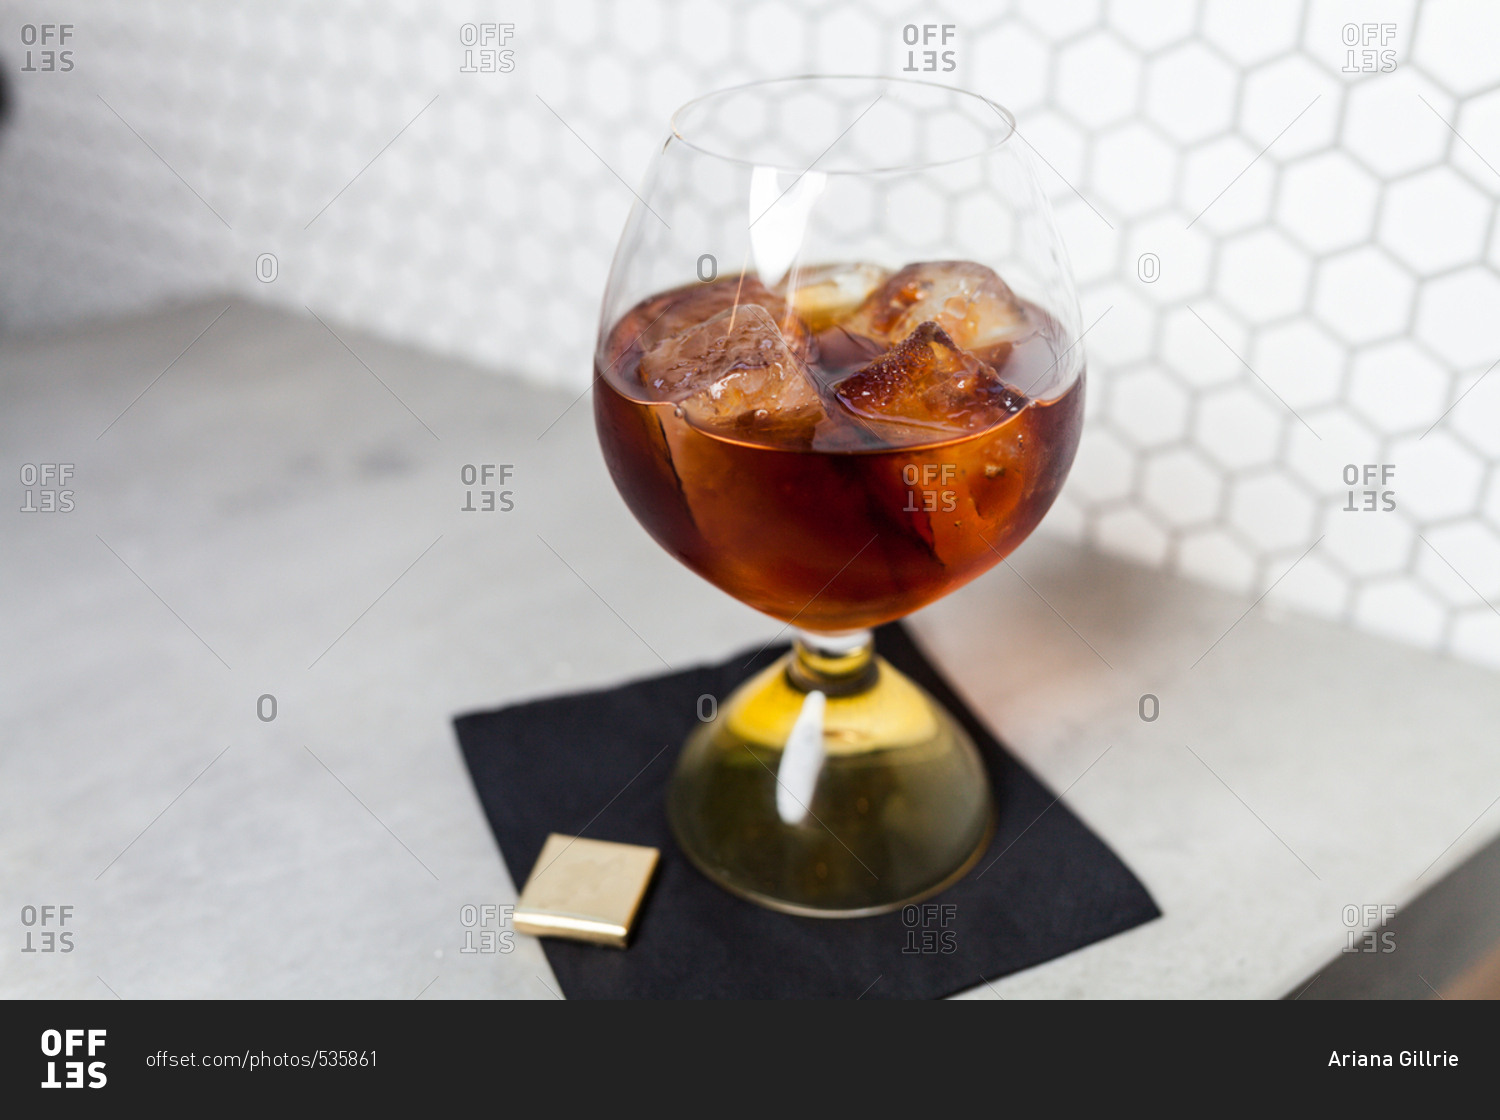 Dark alcoholic drink served in a glass with ice cubes